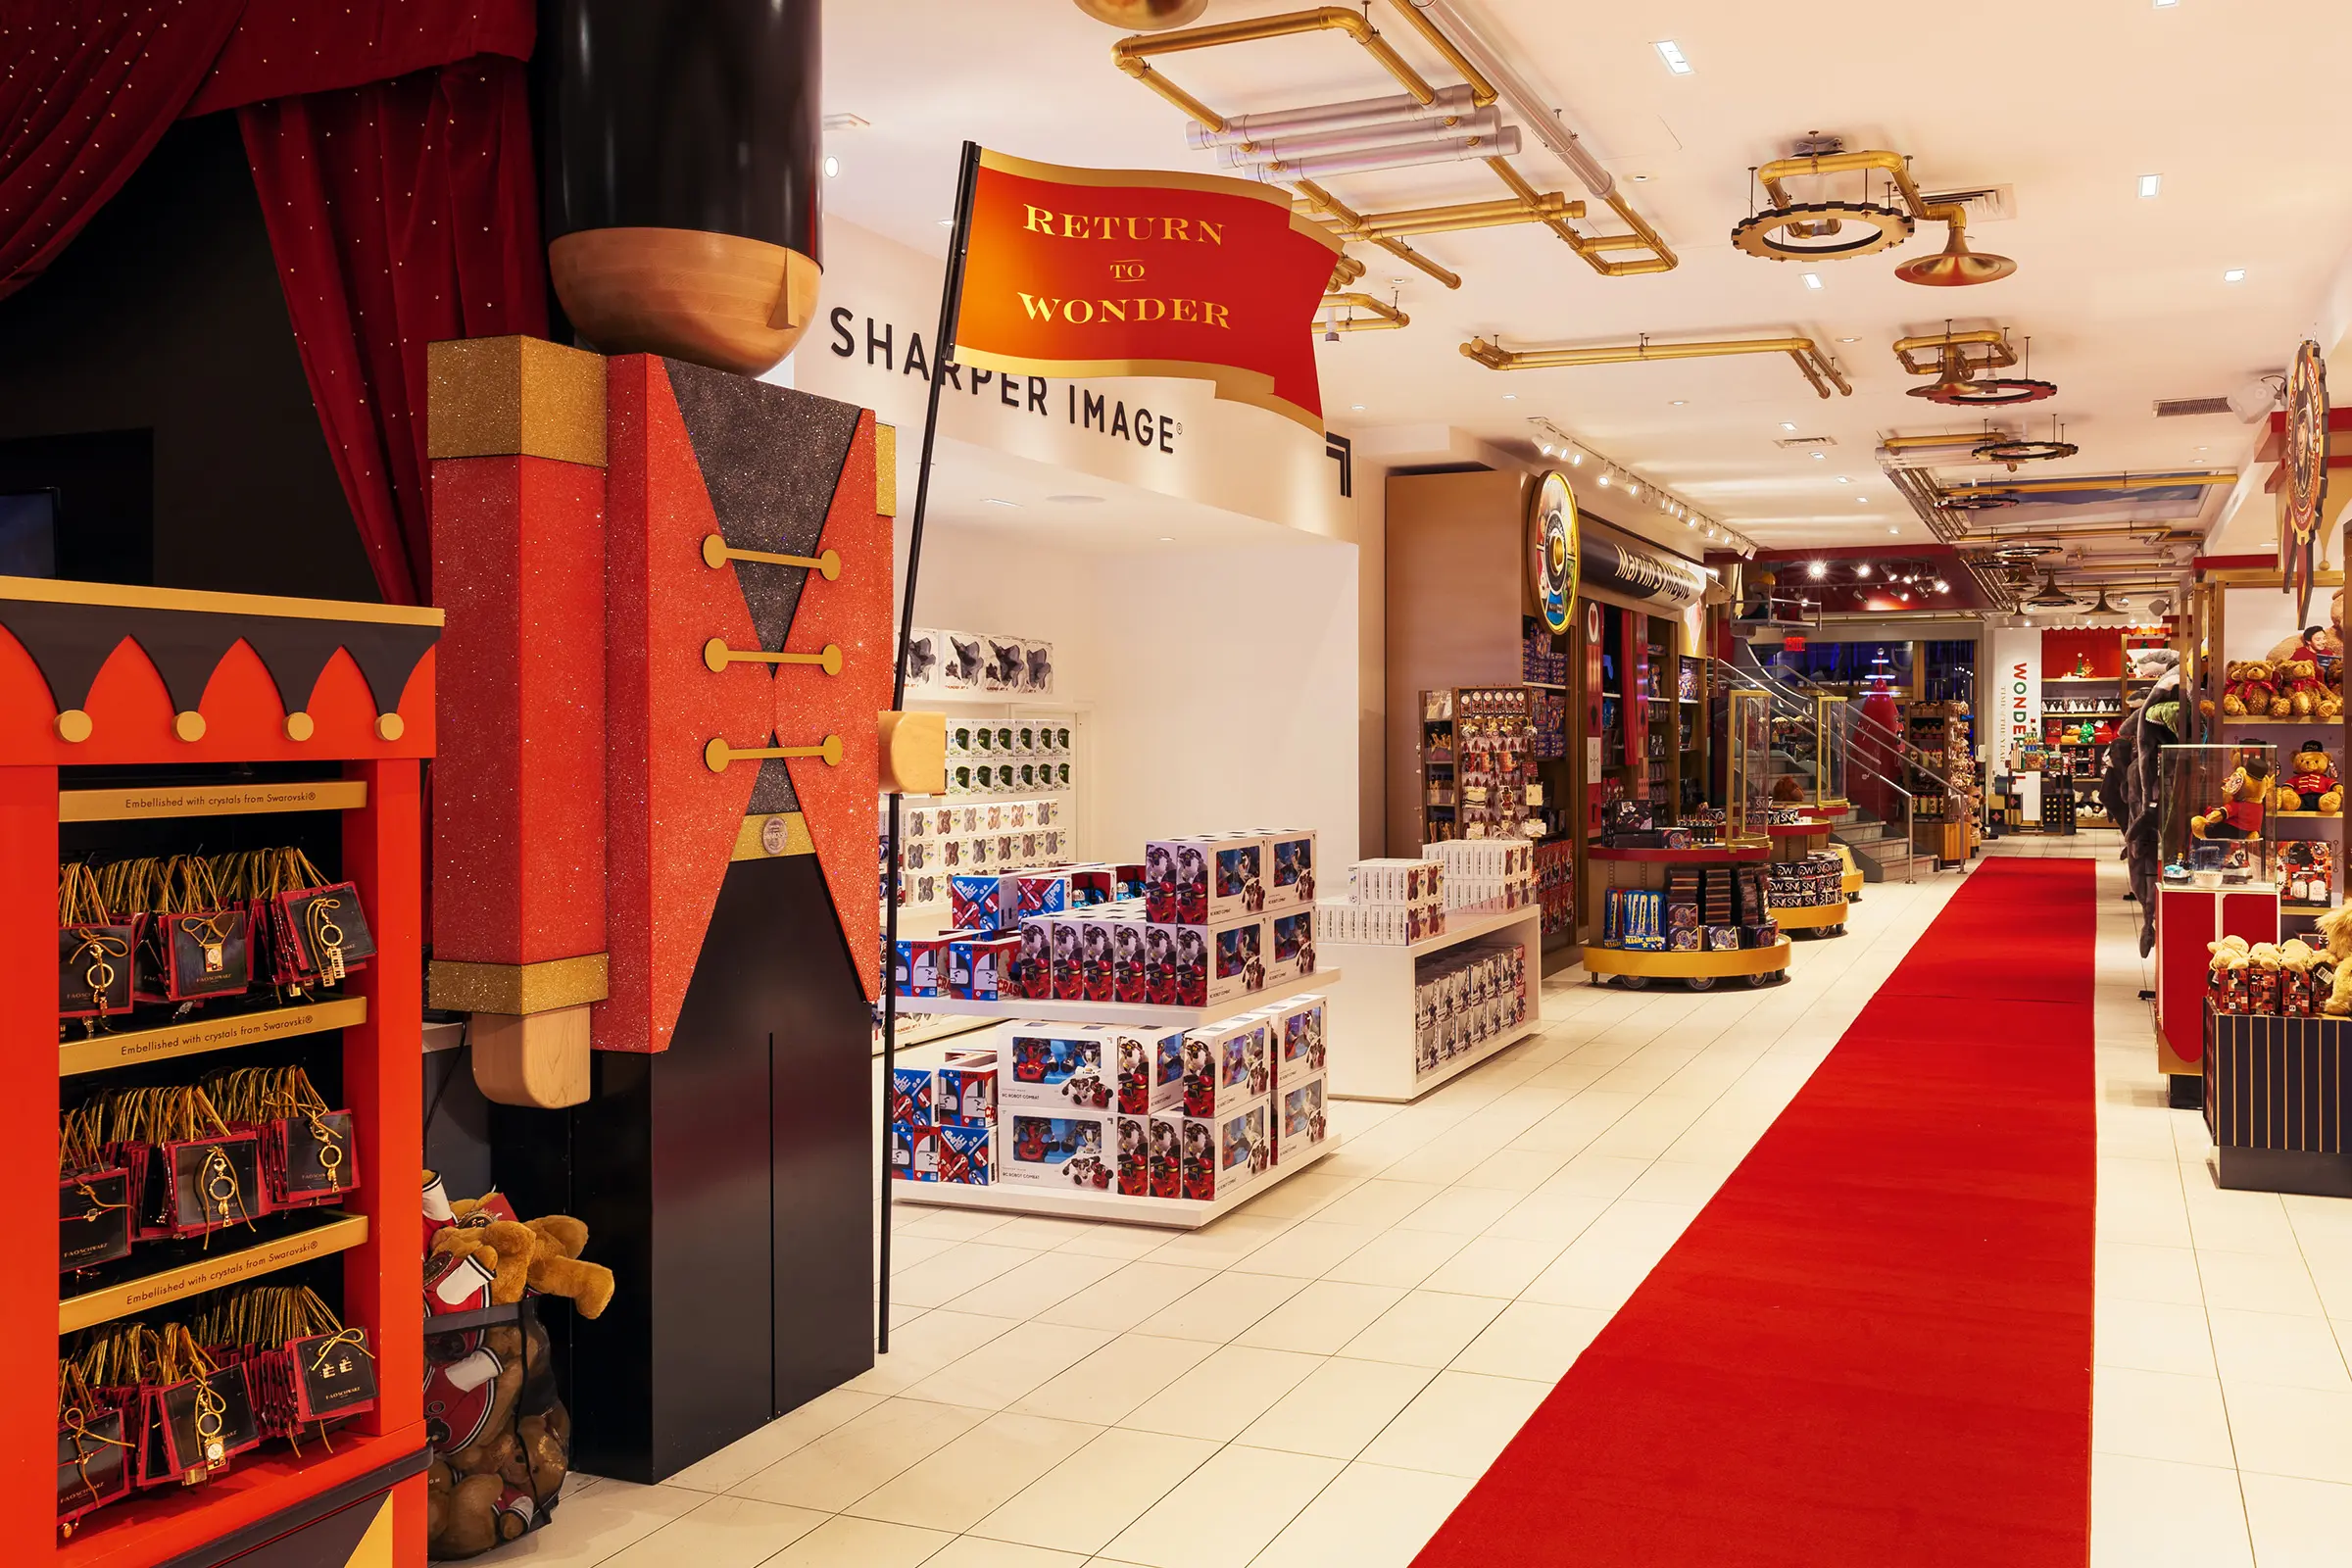 I spent an hour inside FAO Schwarz all by myself—here's what it was like